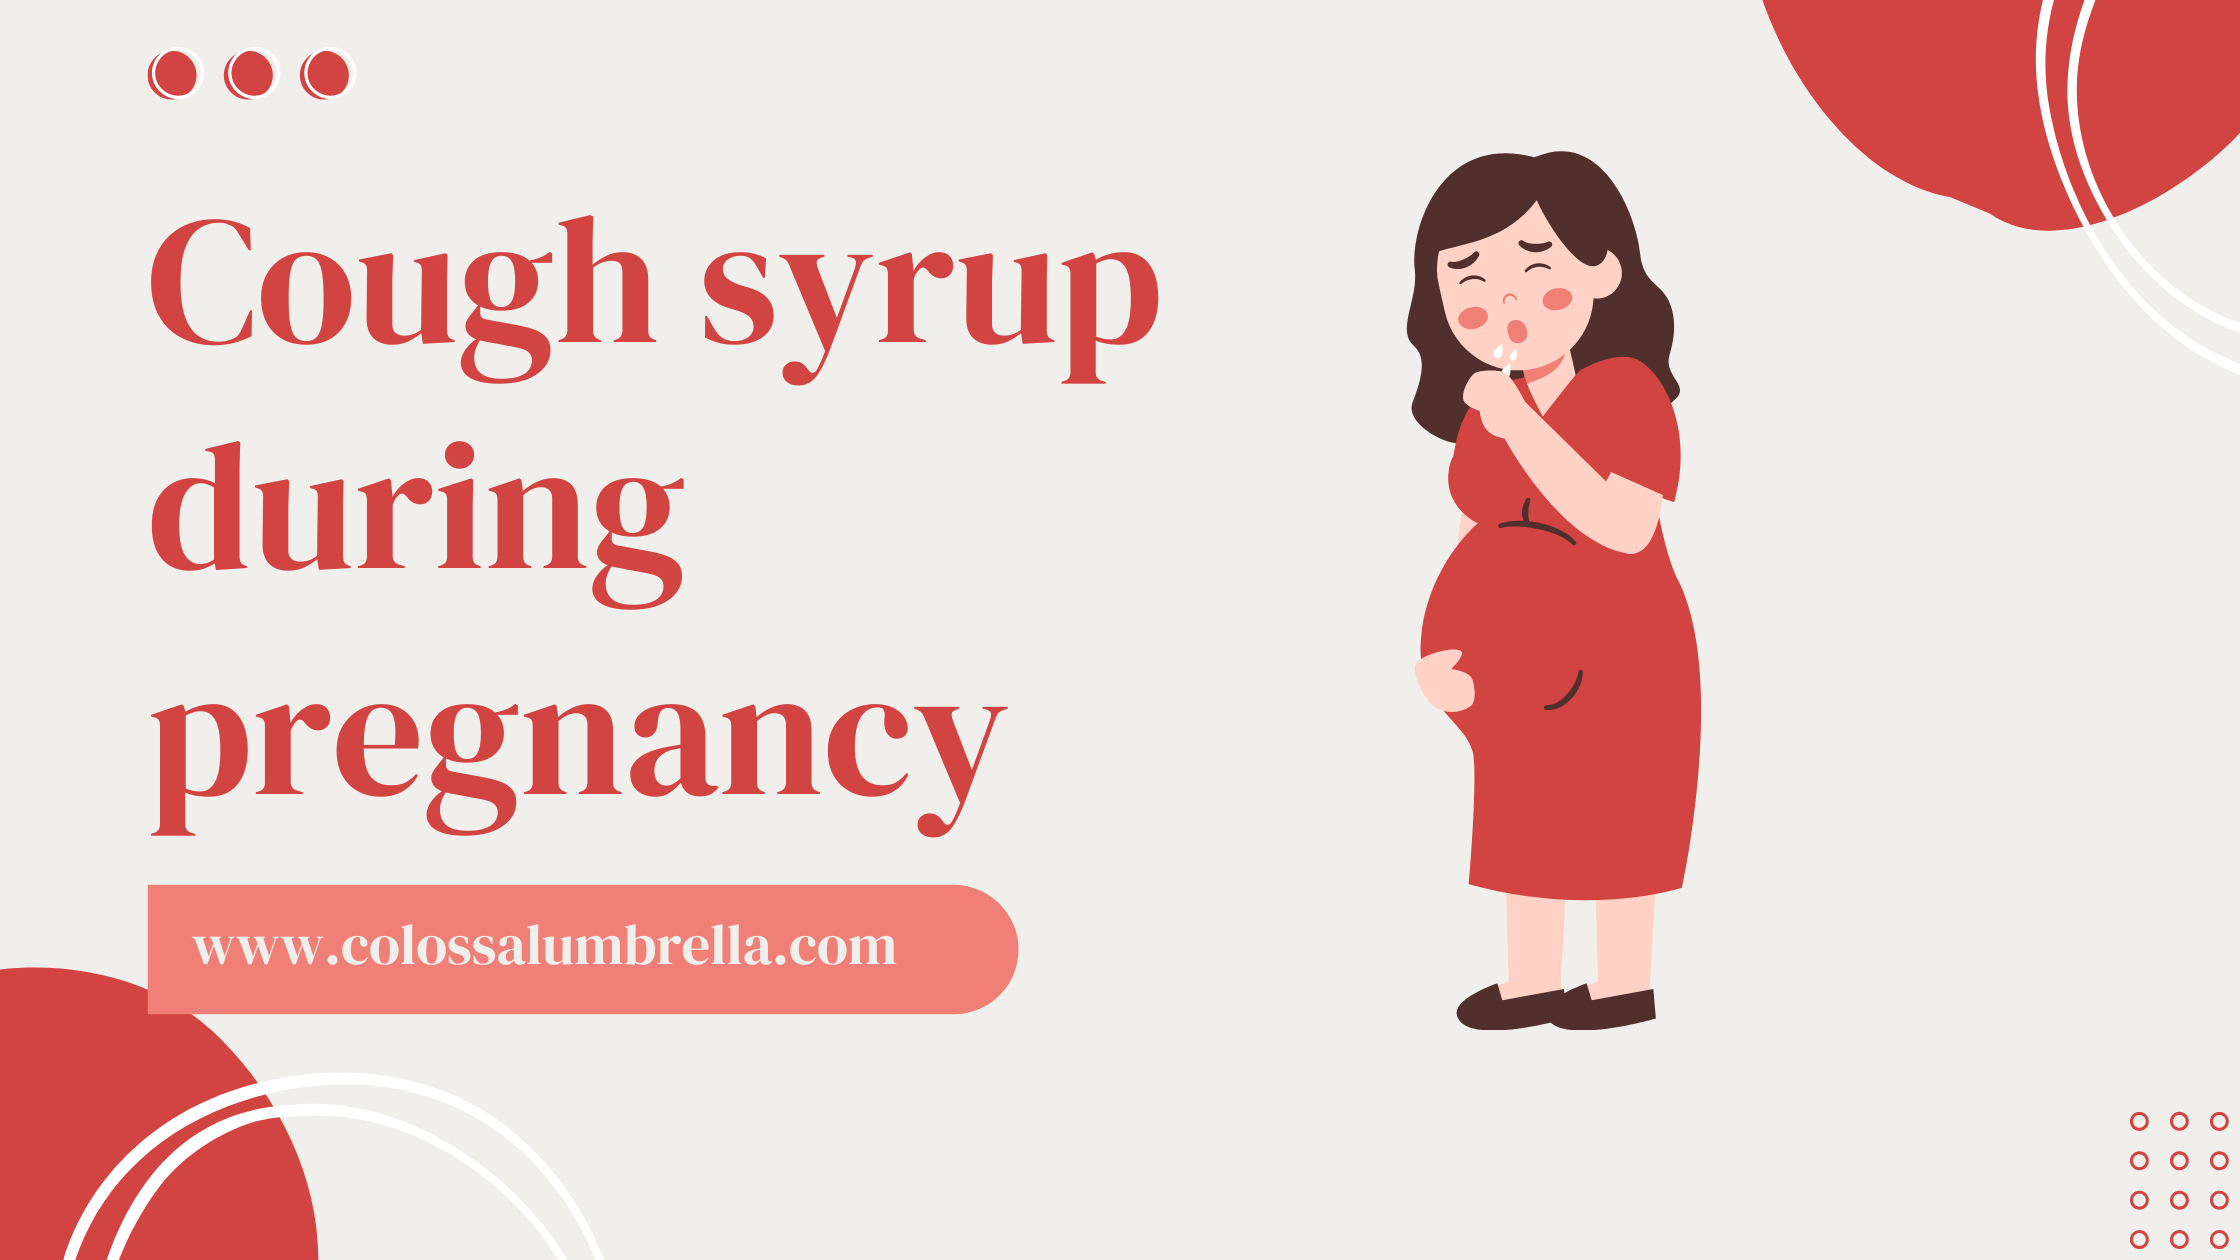 Which cough syrup is safe in pregnancy by Colossalumbrella